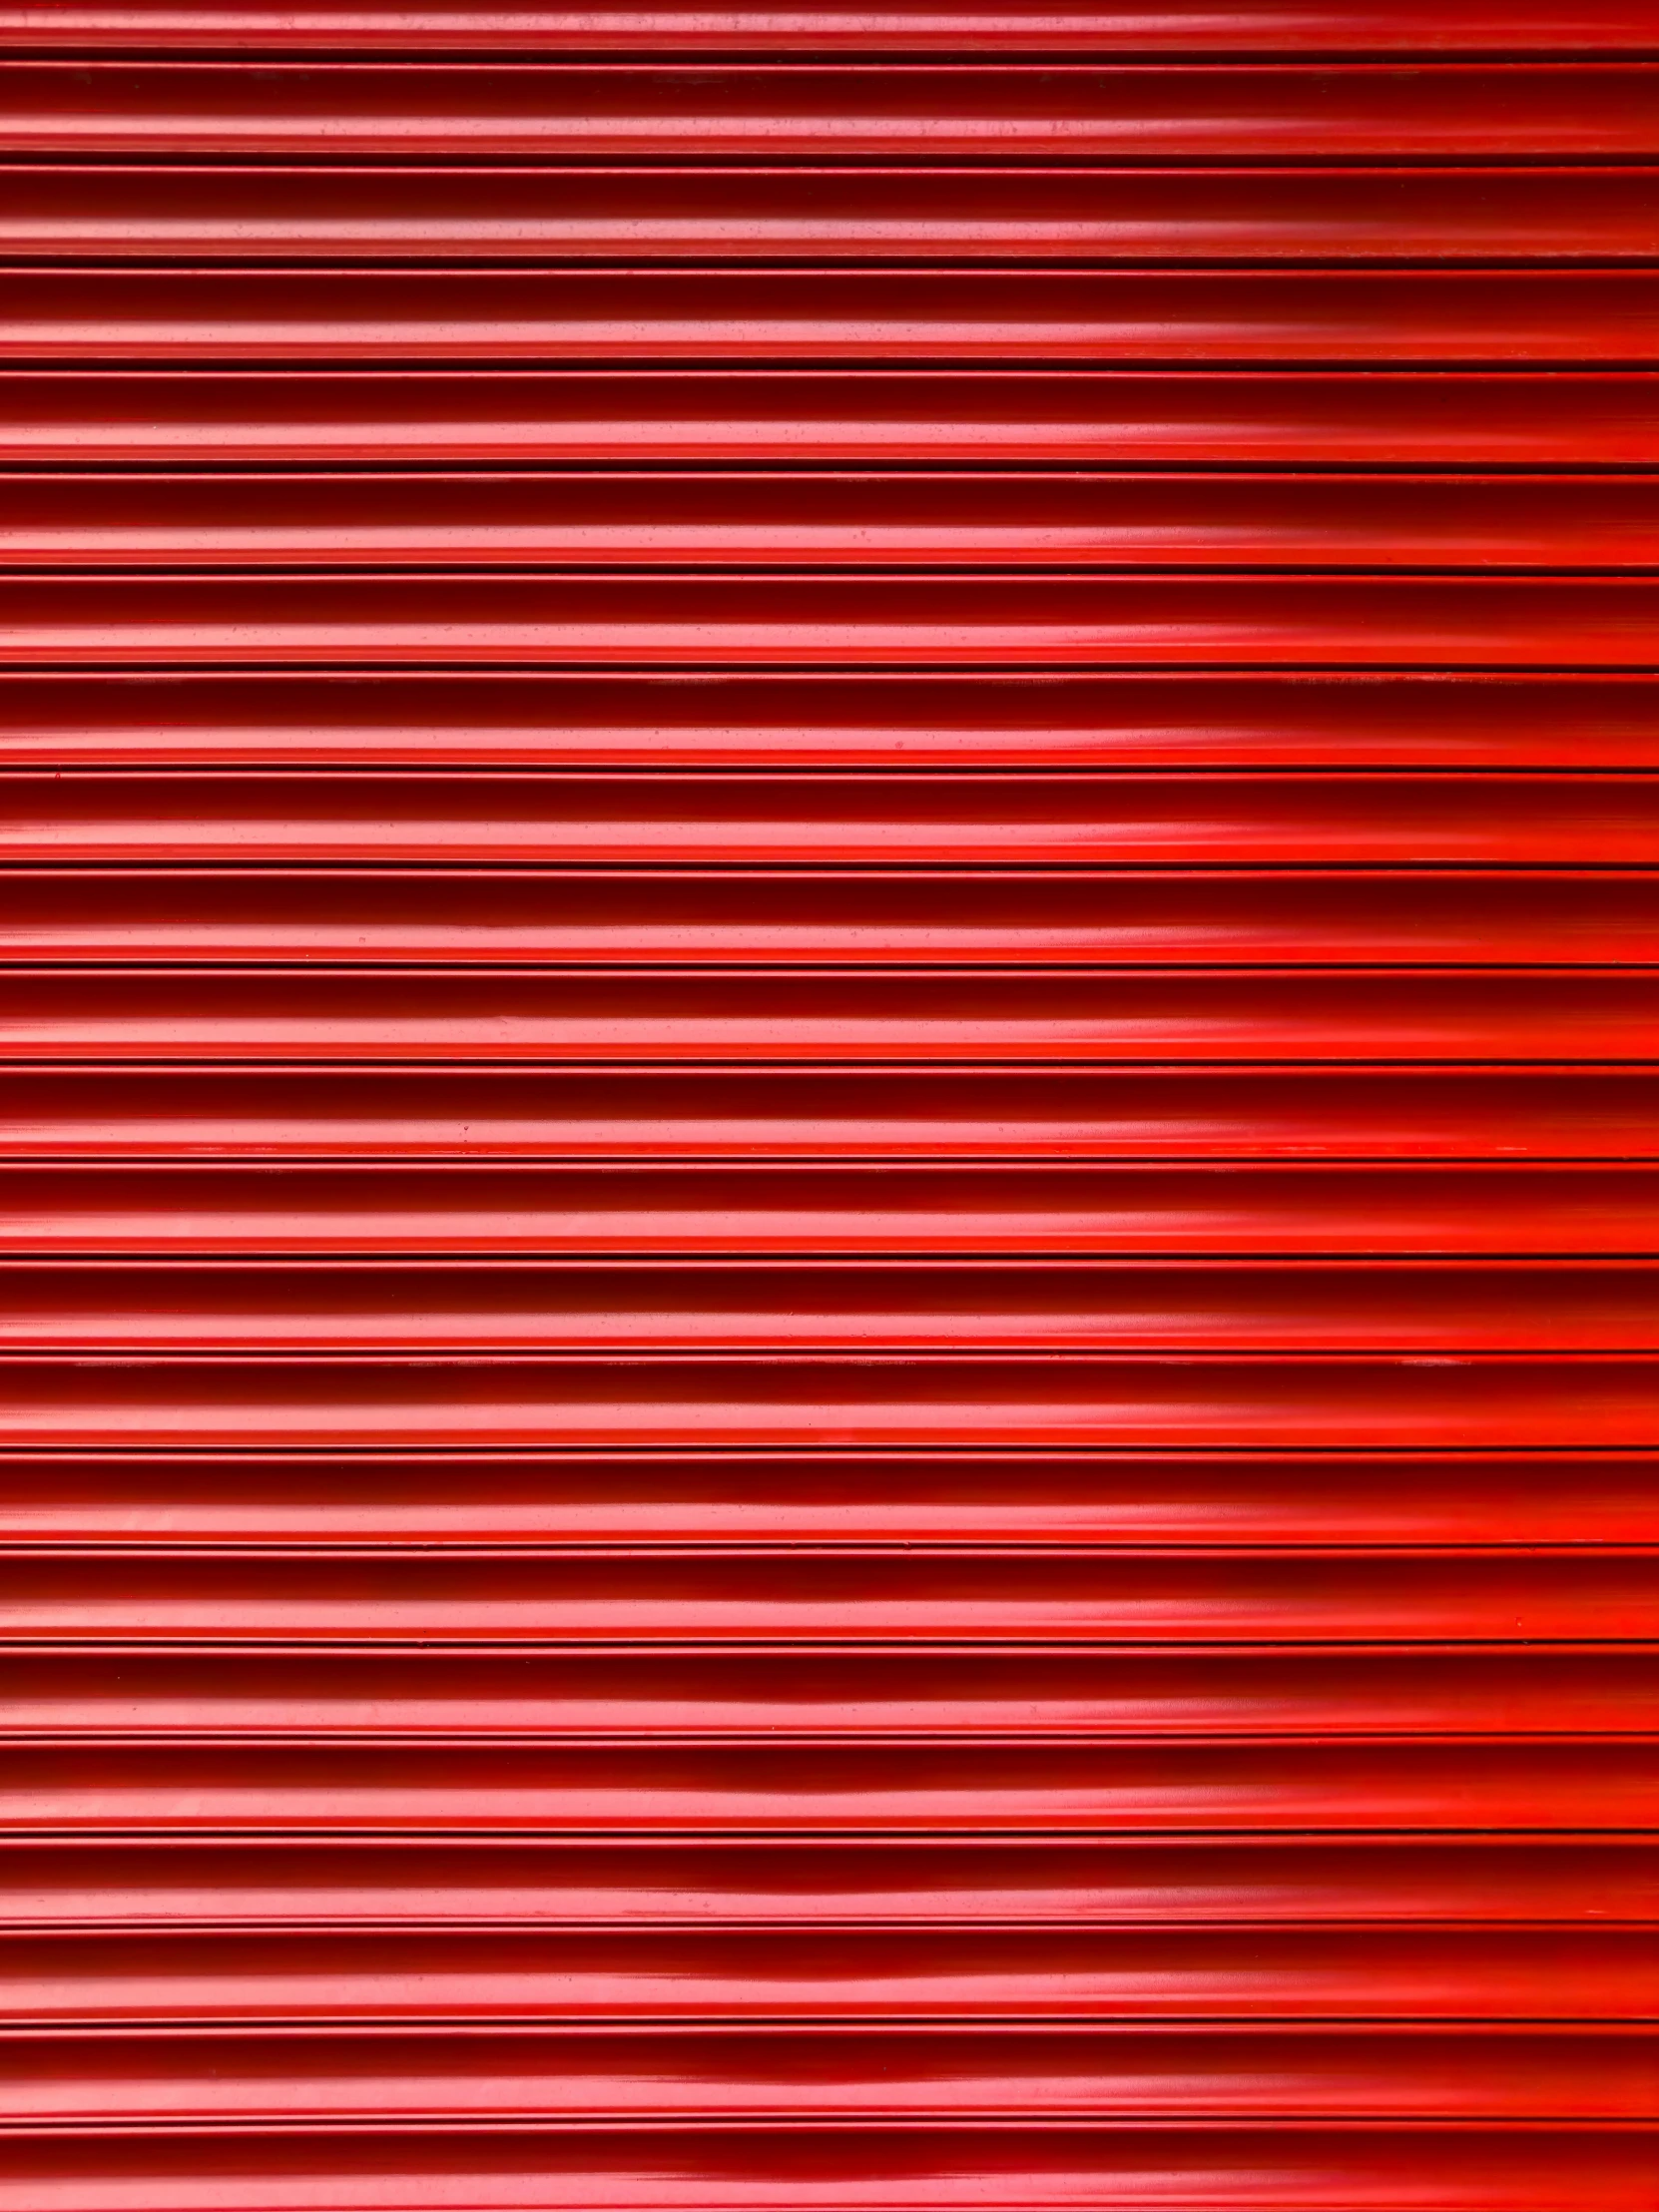 red corrugated siding as background image for an album